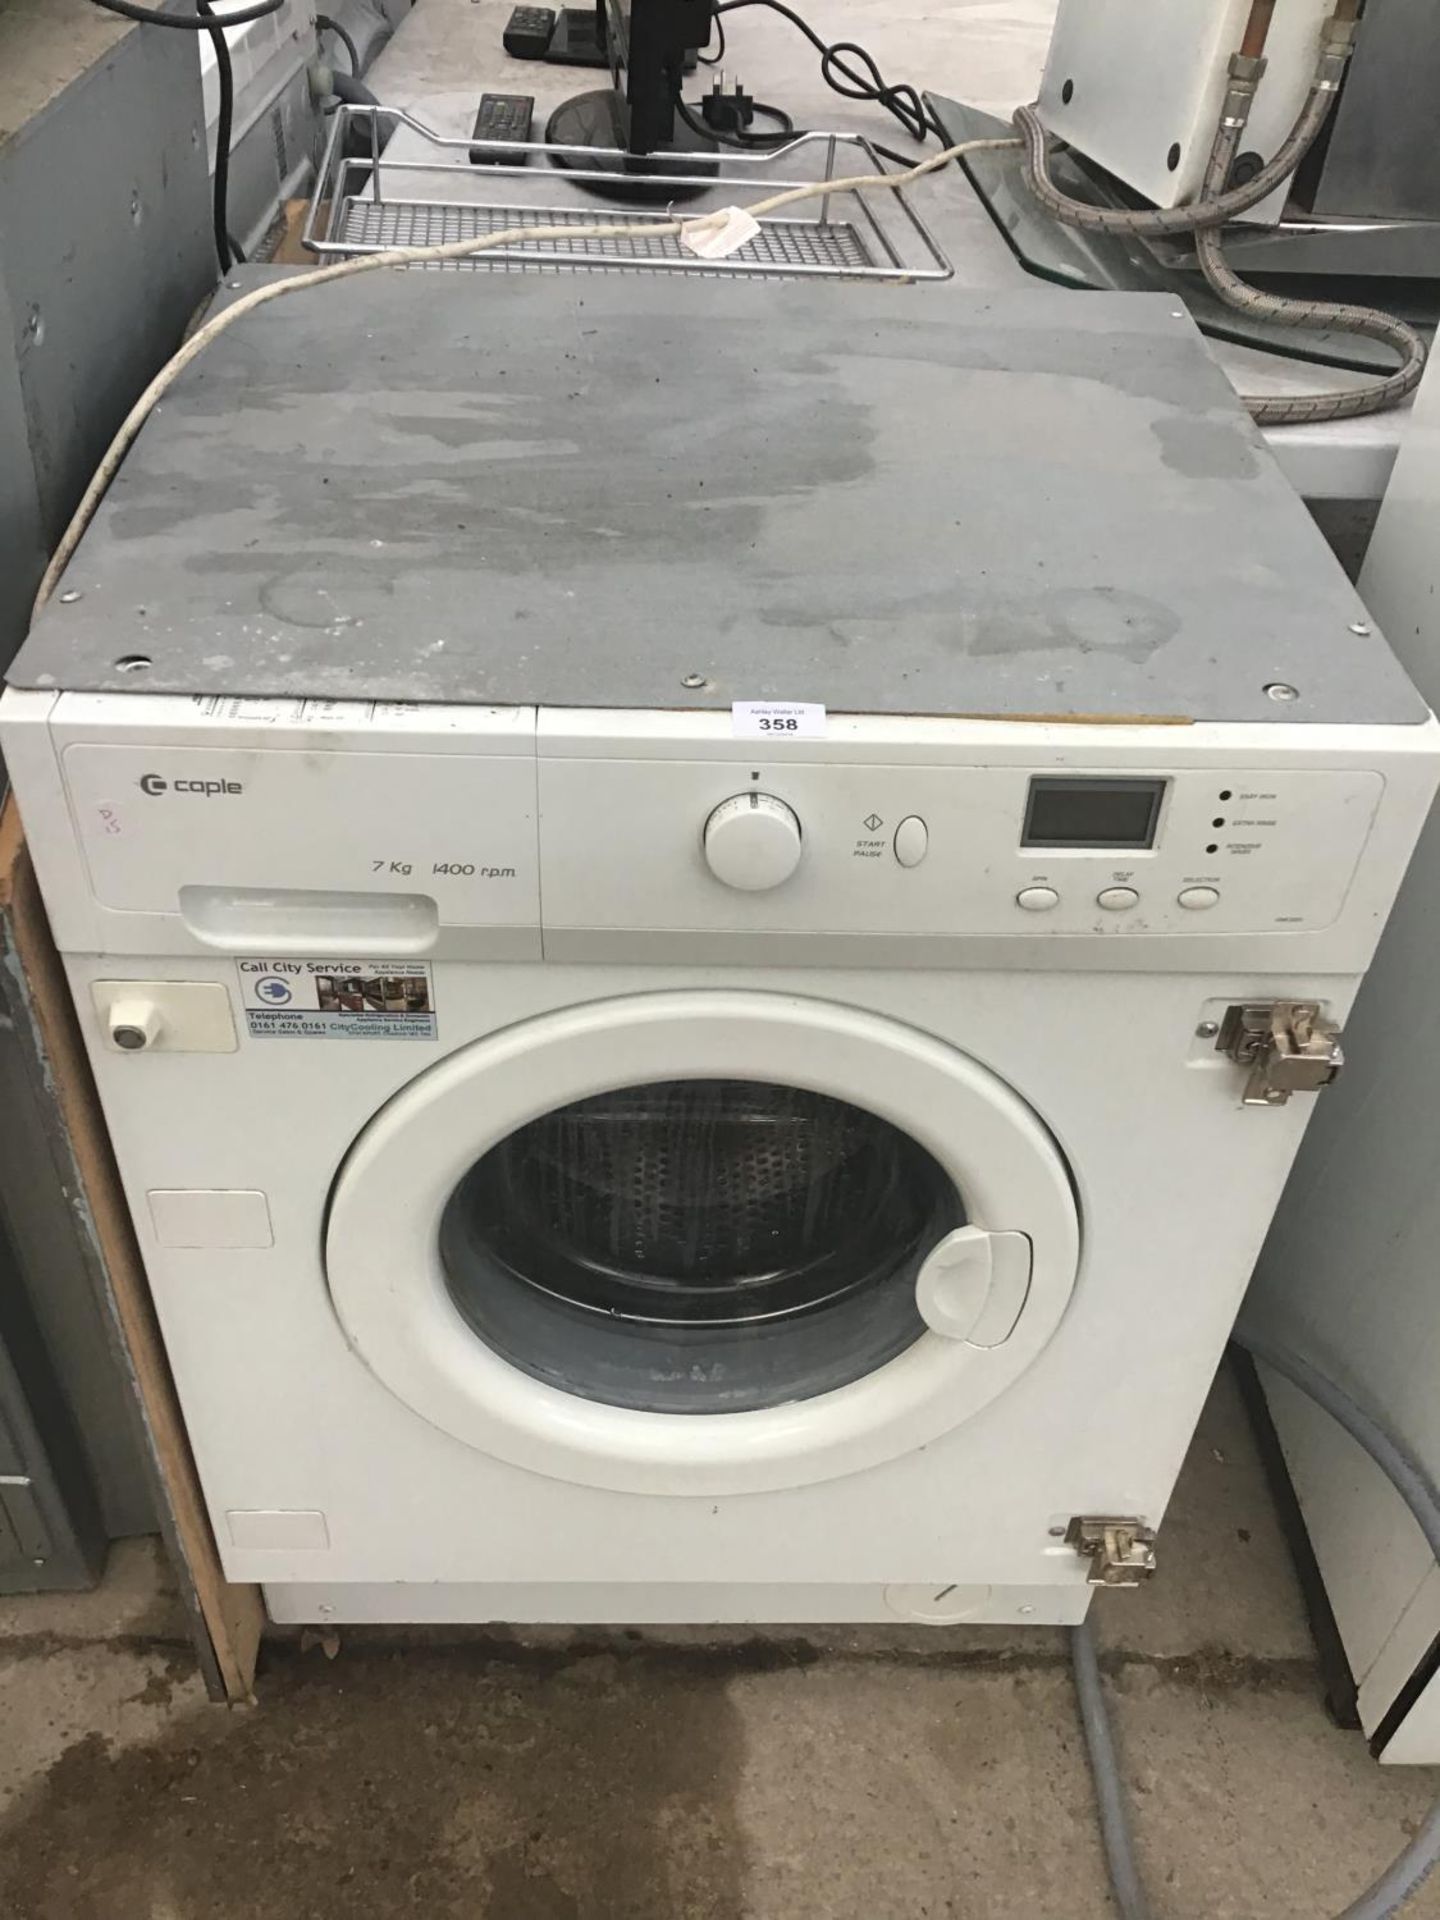 AN INTEGRATED COPLE WASHER IN WORKING ORDER